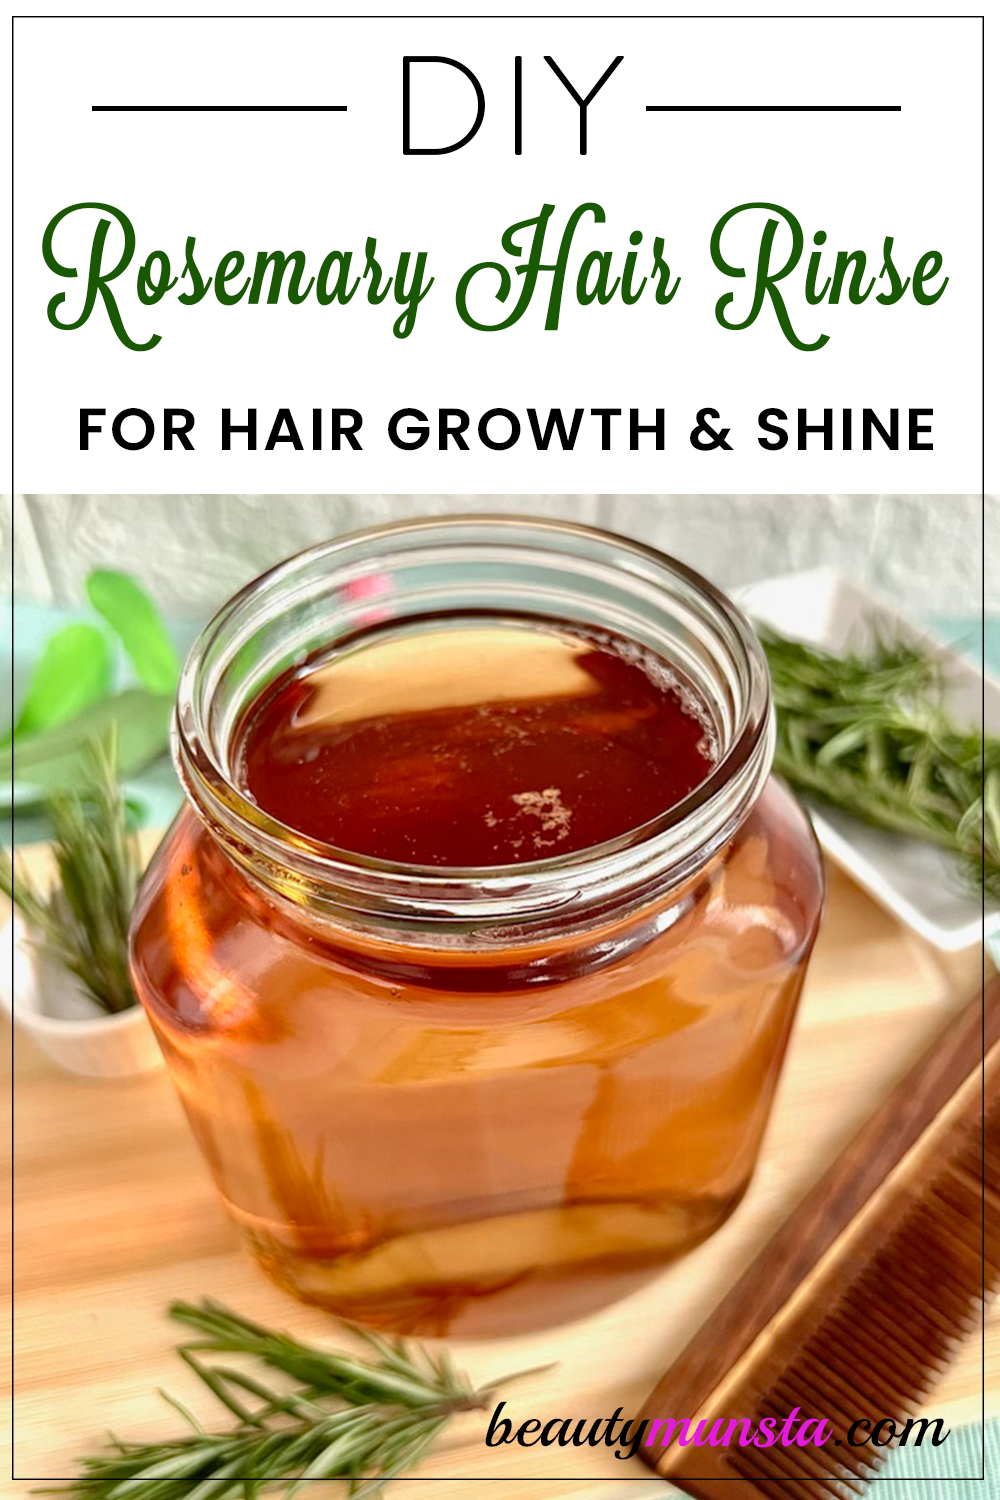 Suffer from thinning hair, premature graying and itchy scalp issues? Try using this herbal DIY rosemary hair rinse for hair growth & more!